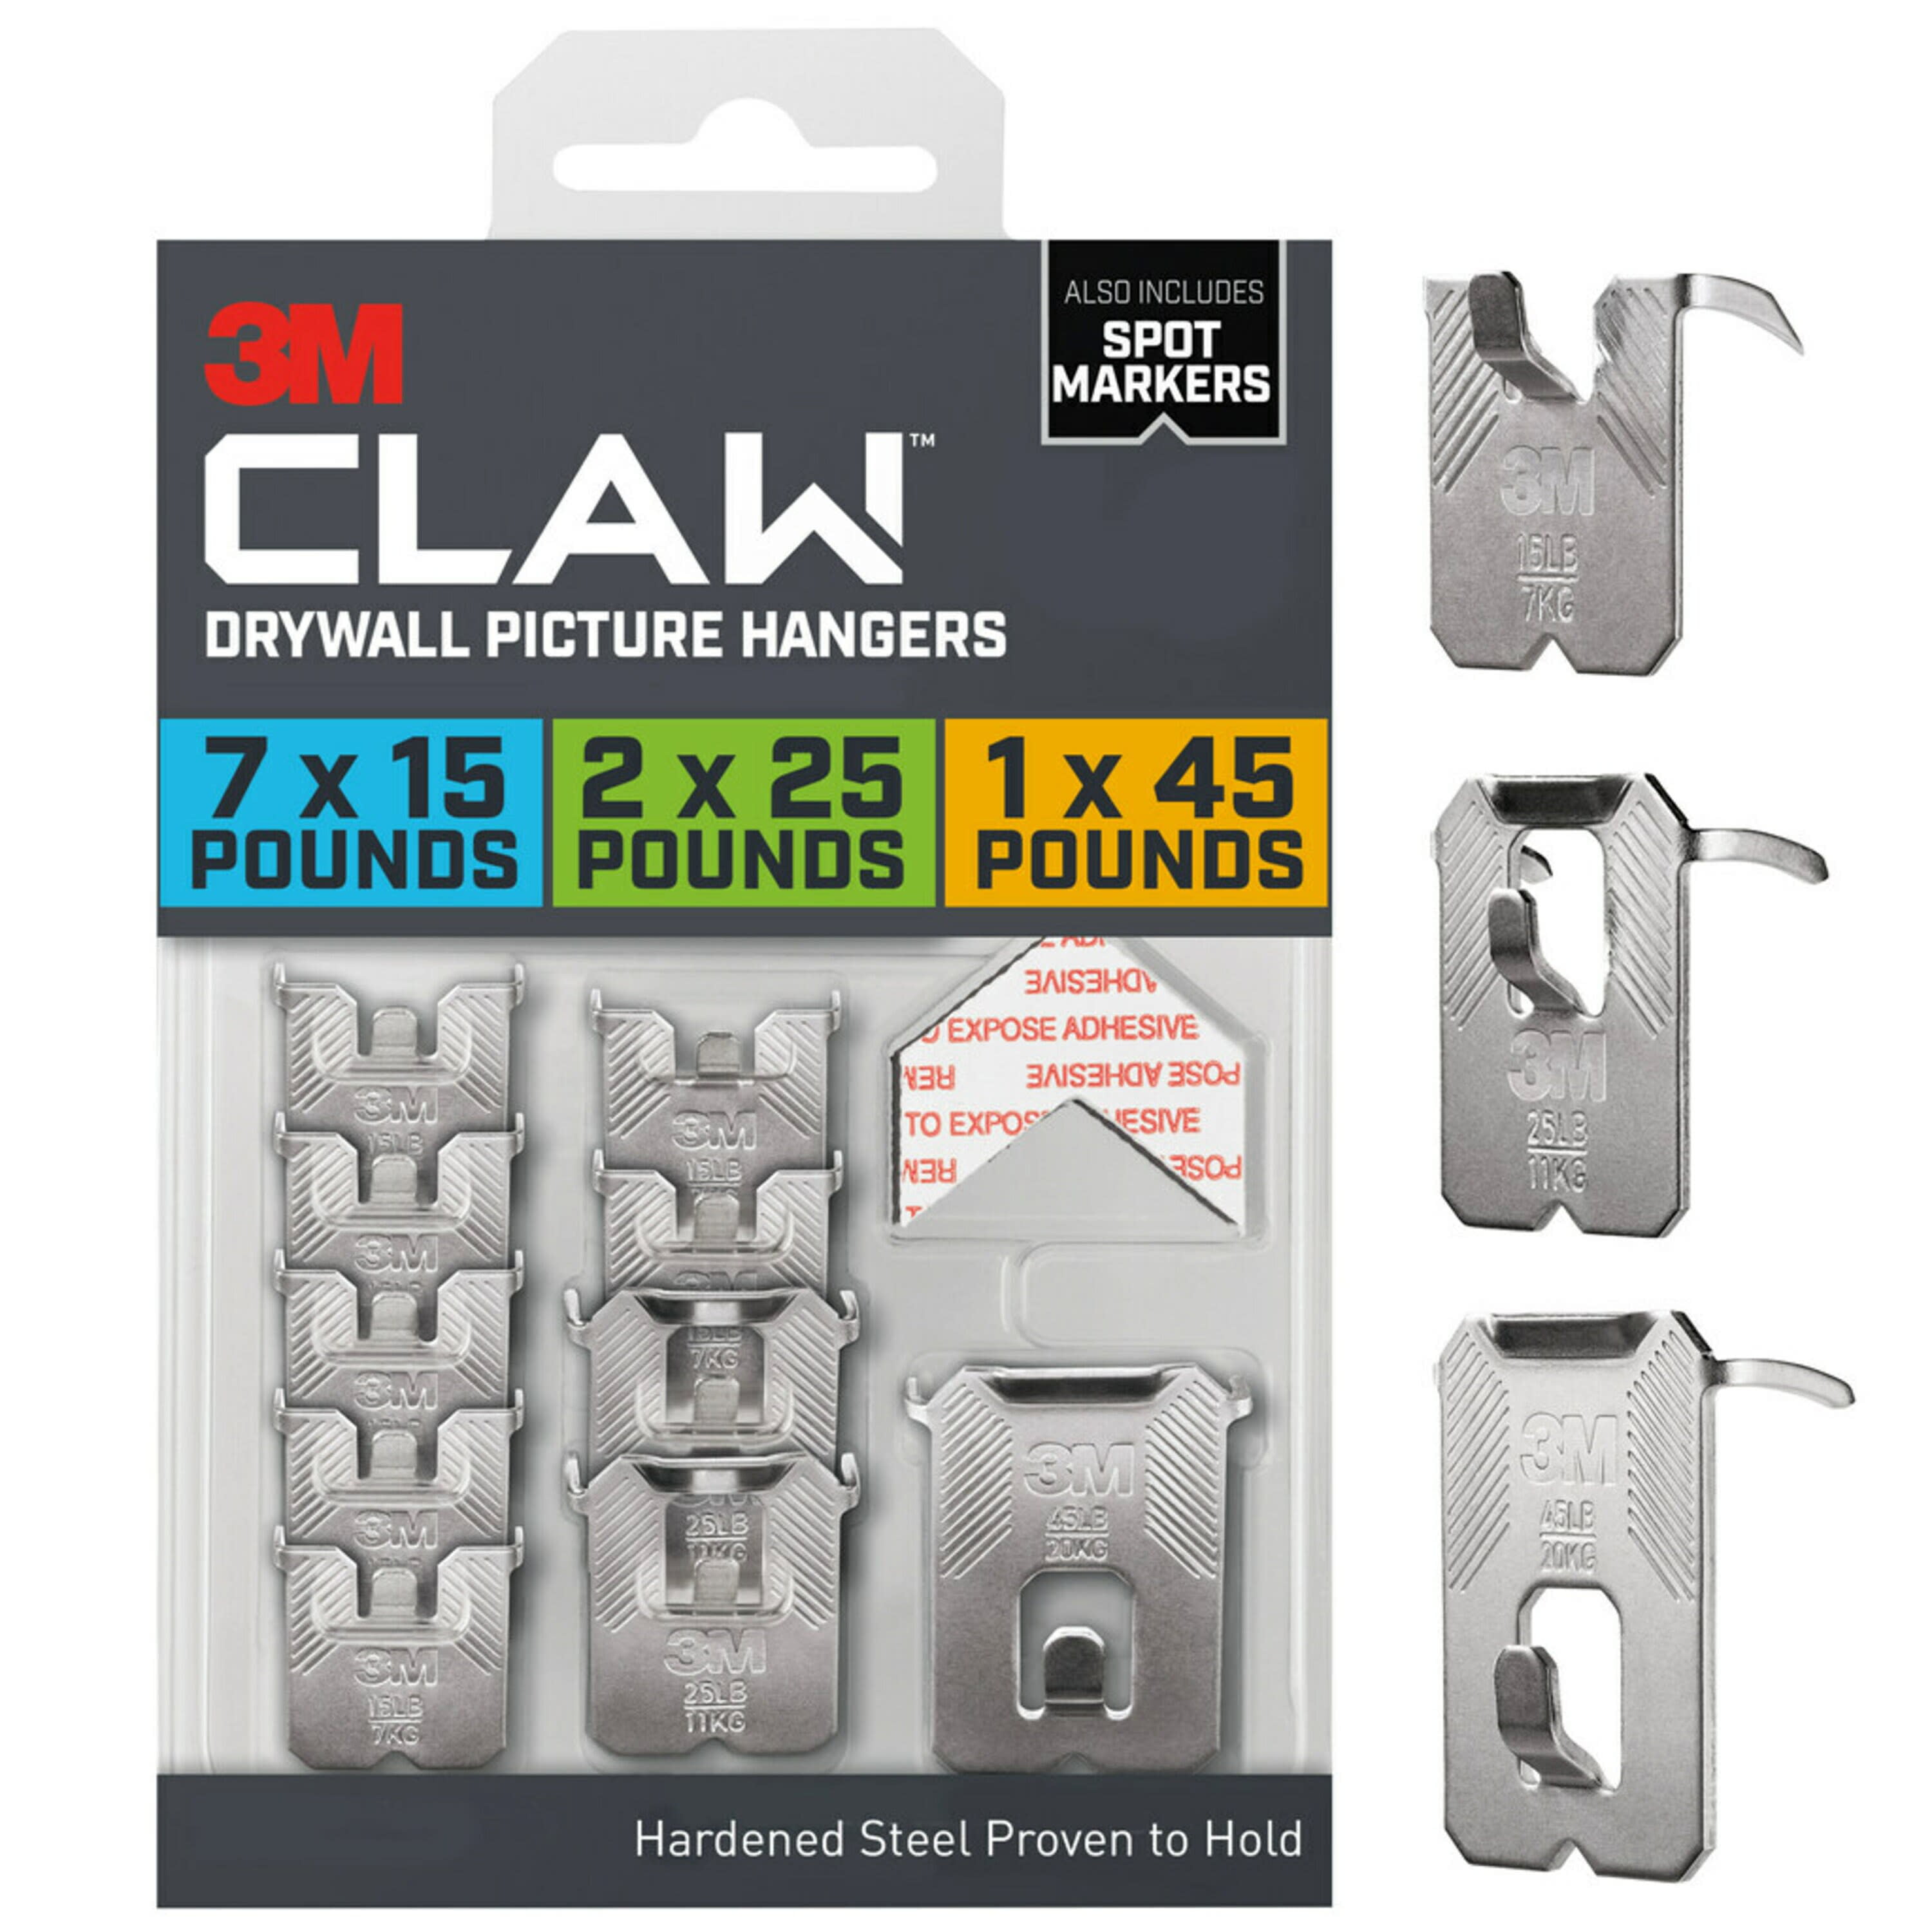 3M CLAW Drywall Picture Hanger Kit, Variety Pack with Spot Markers, Holds  Up To 45 lbs 